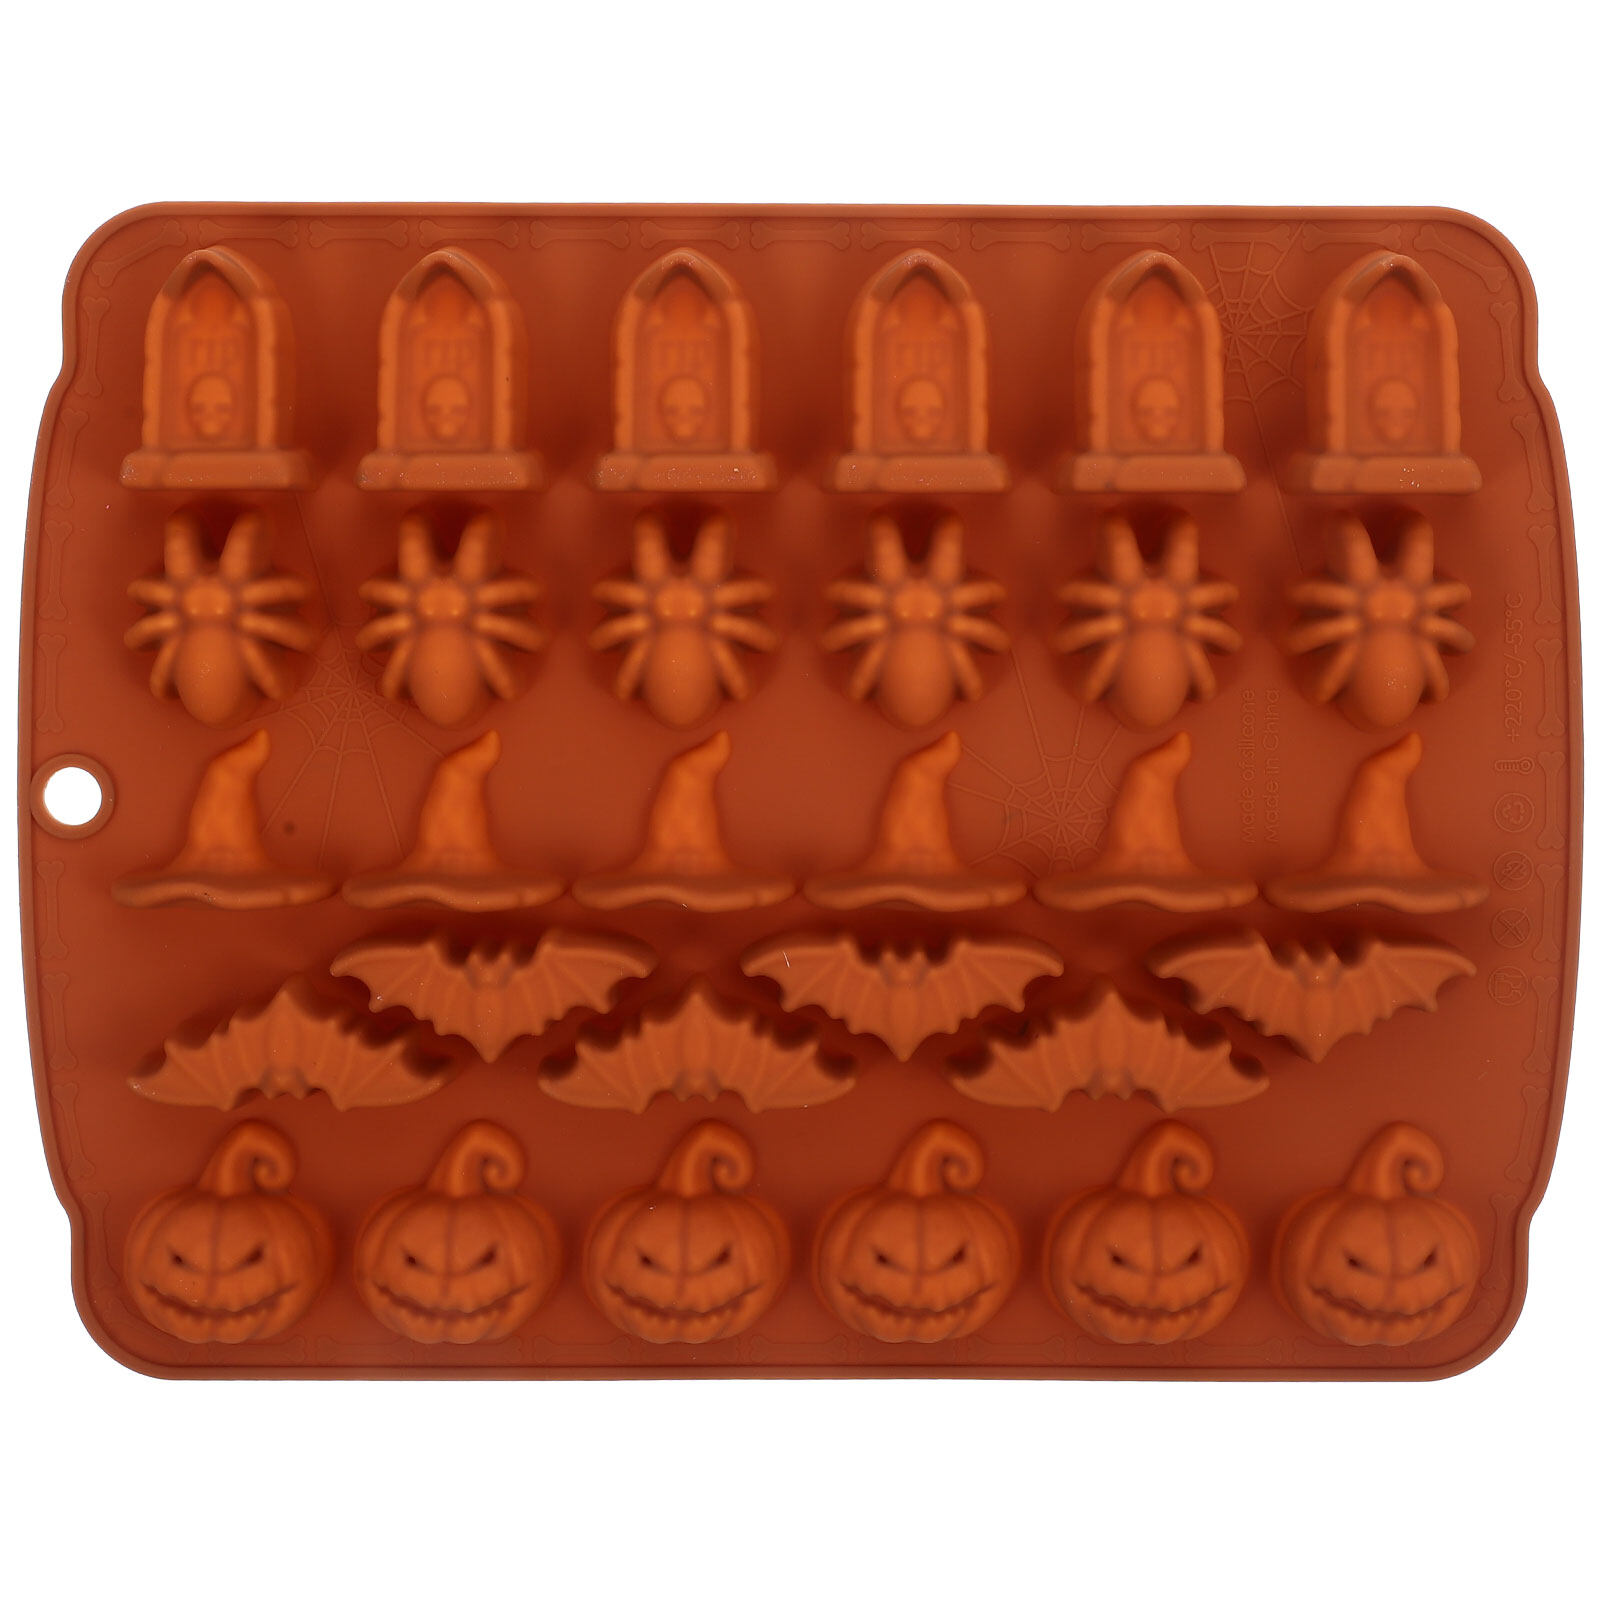 Halloween Cake Mold Cookie Silicone Mold Halloween Muffin Mold